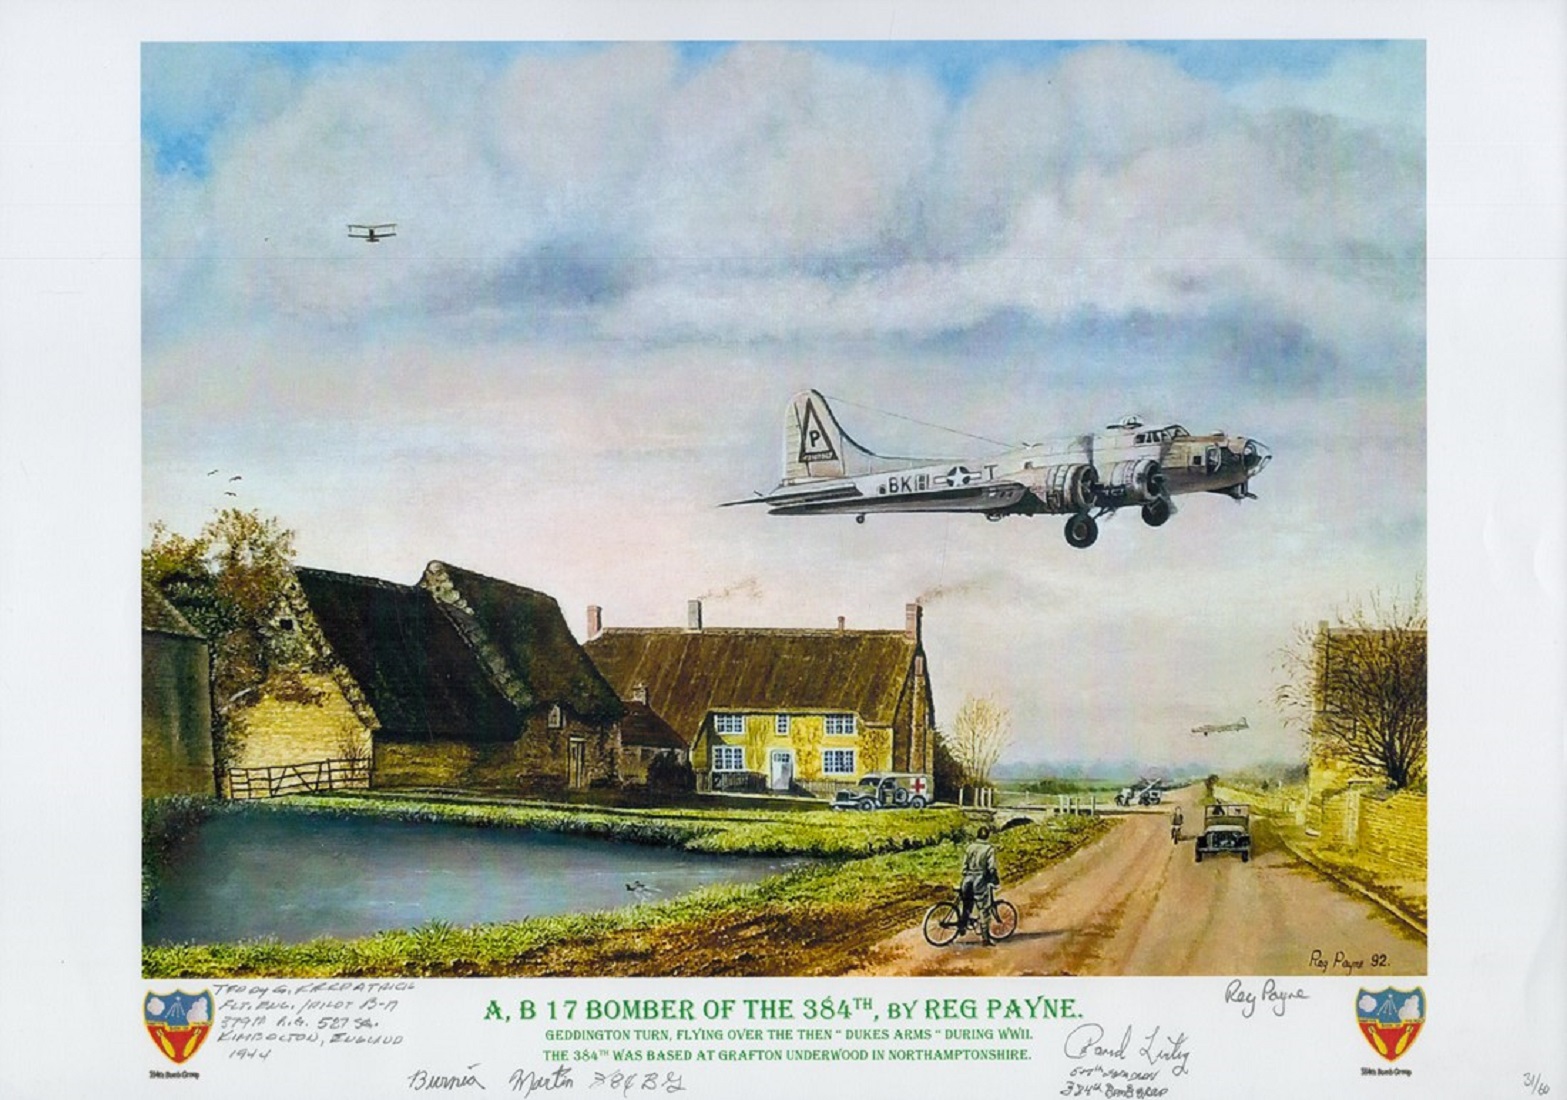 B 17 Bomber of the 384th USAAF by Reg Payne print. Signed by Staff Sgt Martin, Staff Sgt Estrin,